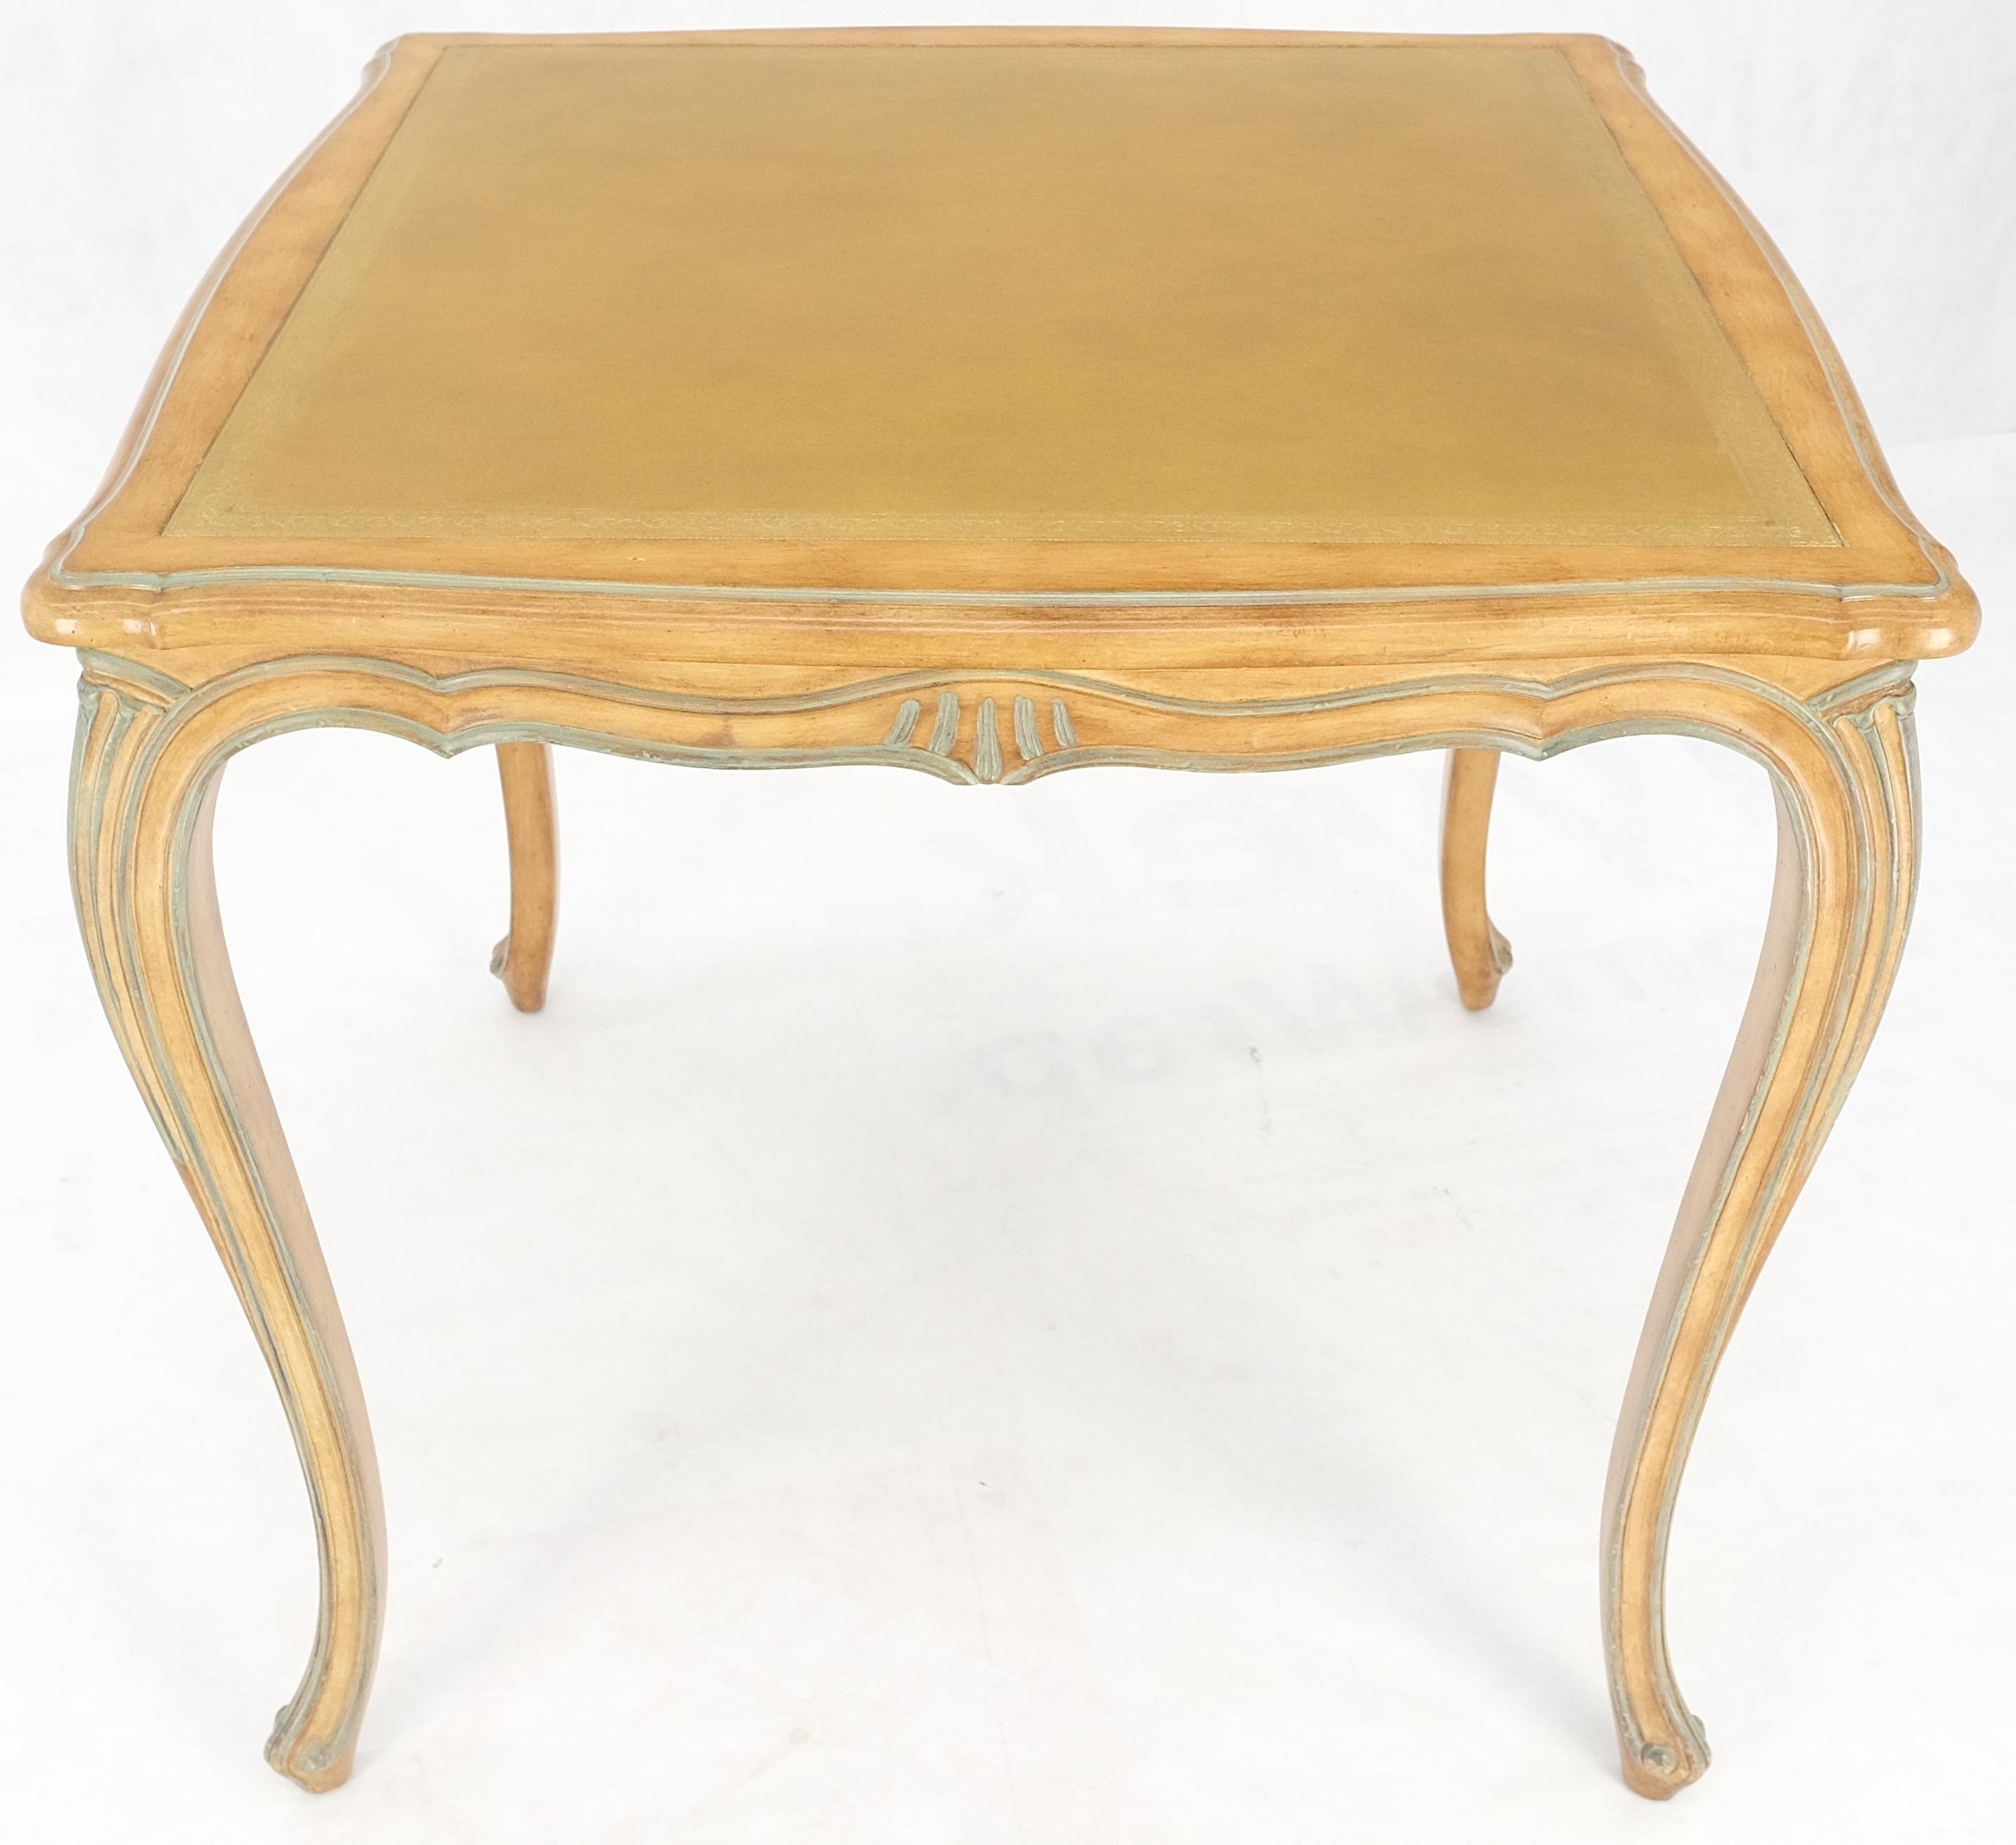 Lacquered Beige to Off White Wash Finish Leather Top French Provincial Square Game Table  For Sale